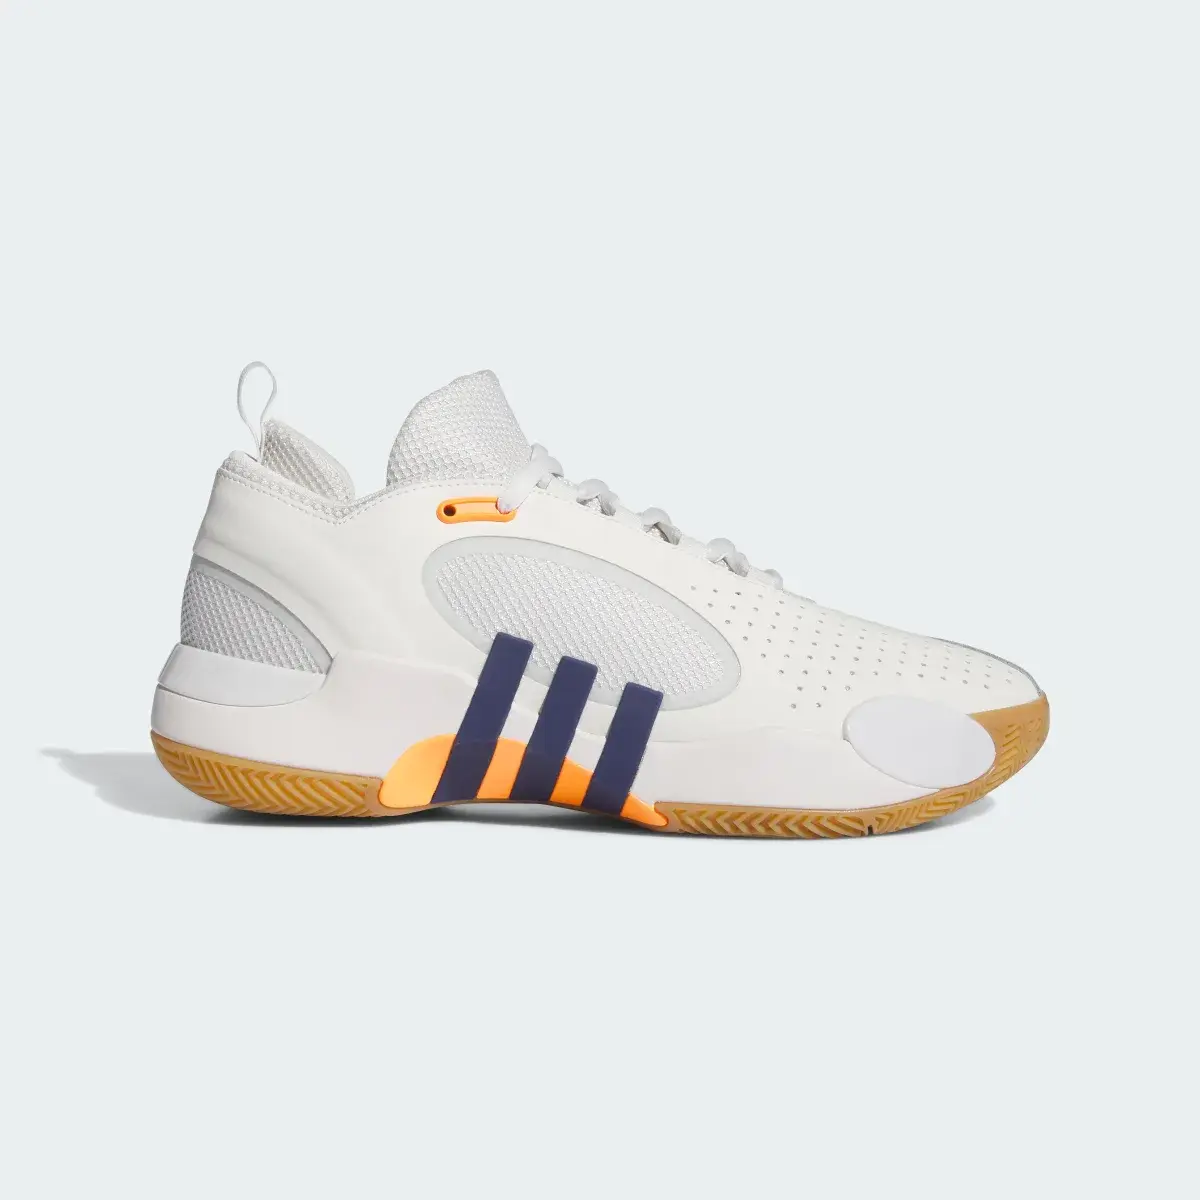 Adidas D.O.N. Issue 5 Shoes. 2